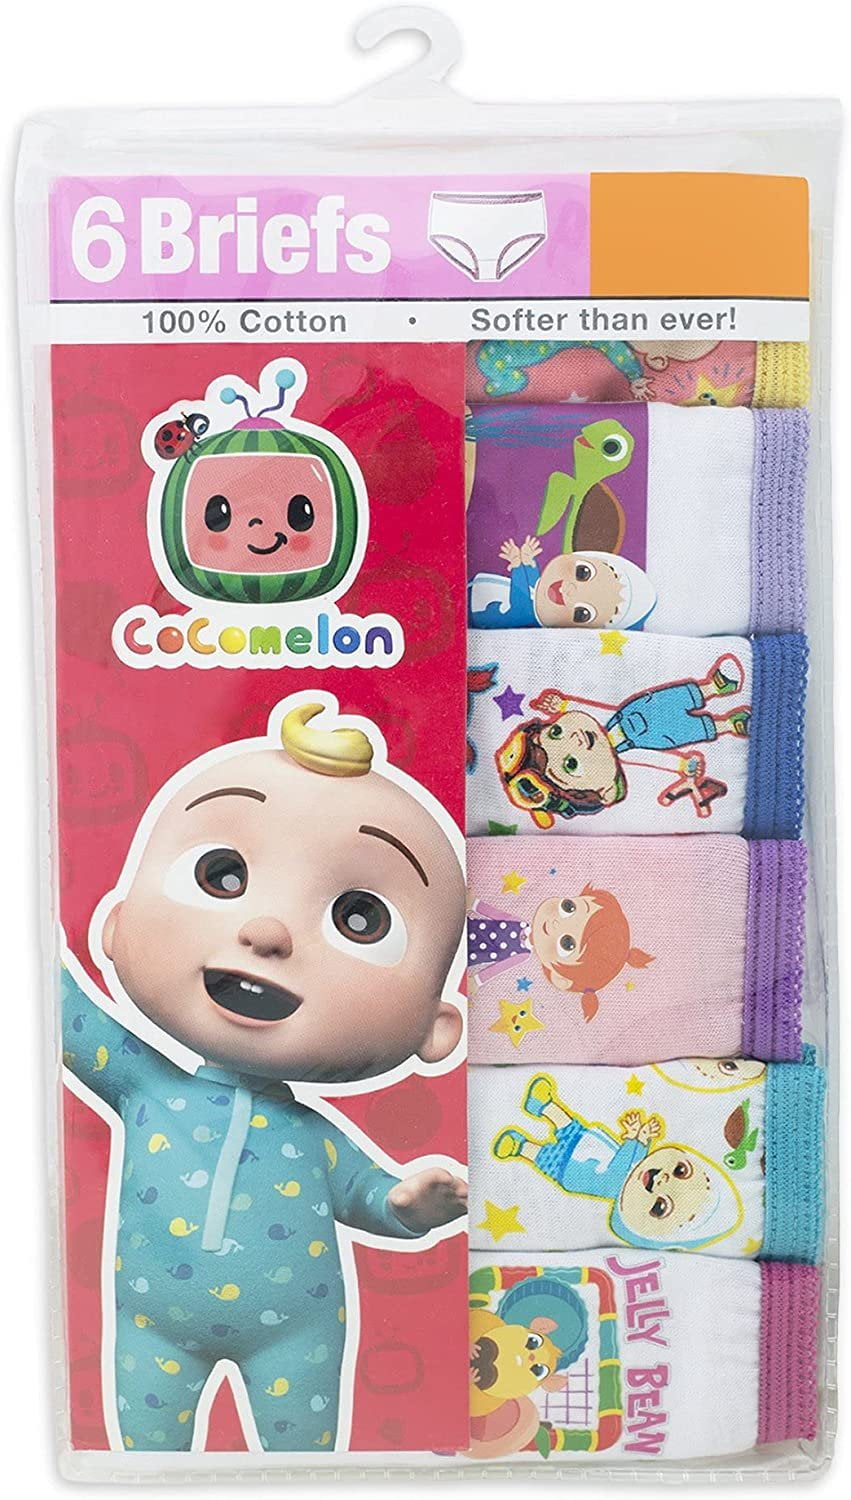  Coco Melon girls Underwear Multipack Briefs, Cocomelon10pk, 2-3T  US: Clothing, Shoes & Jewelry